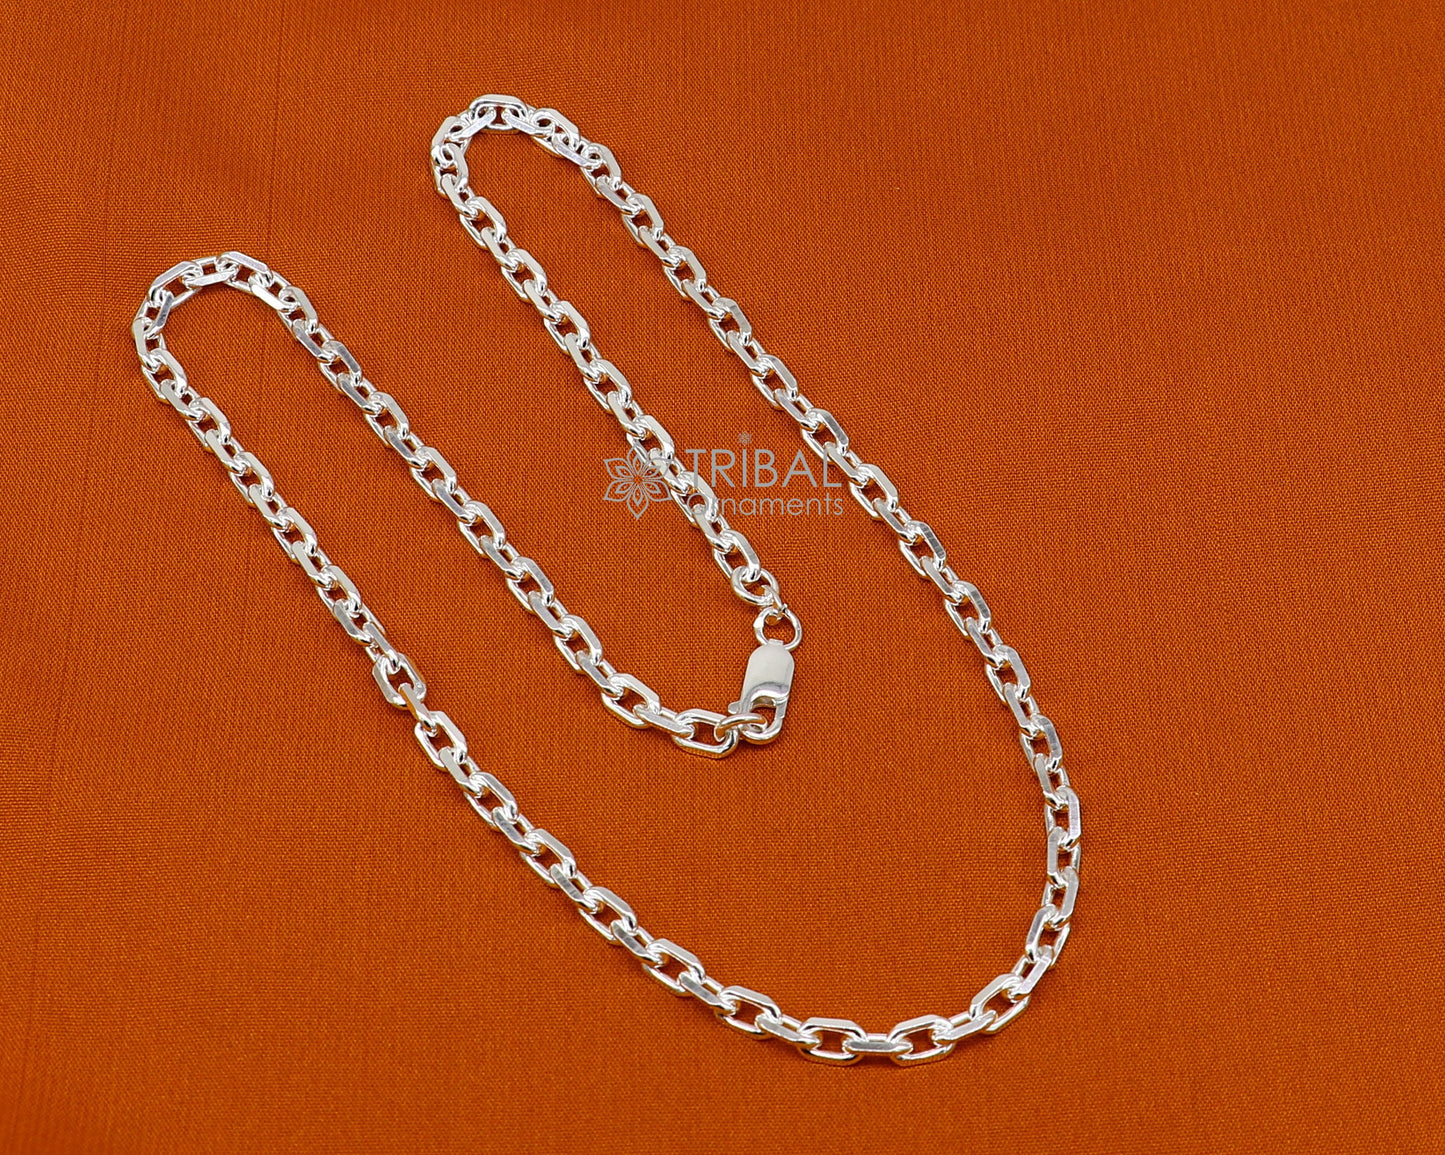 20" 5mm 925 Sterling silver handmade fabulous vintage look Rolo chain unisex gifting necklace jewelry from india ch231 - TRIBAL ORNAMENTS